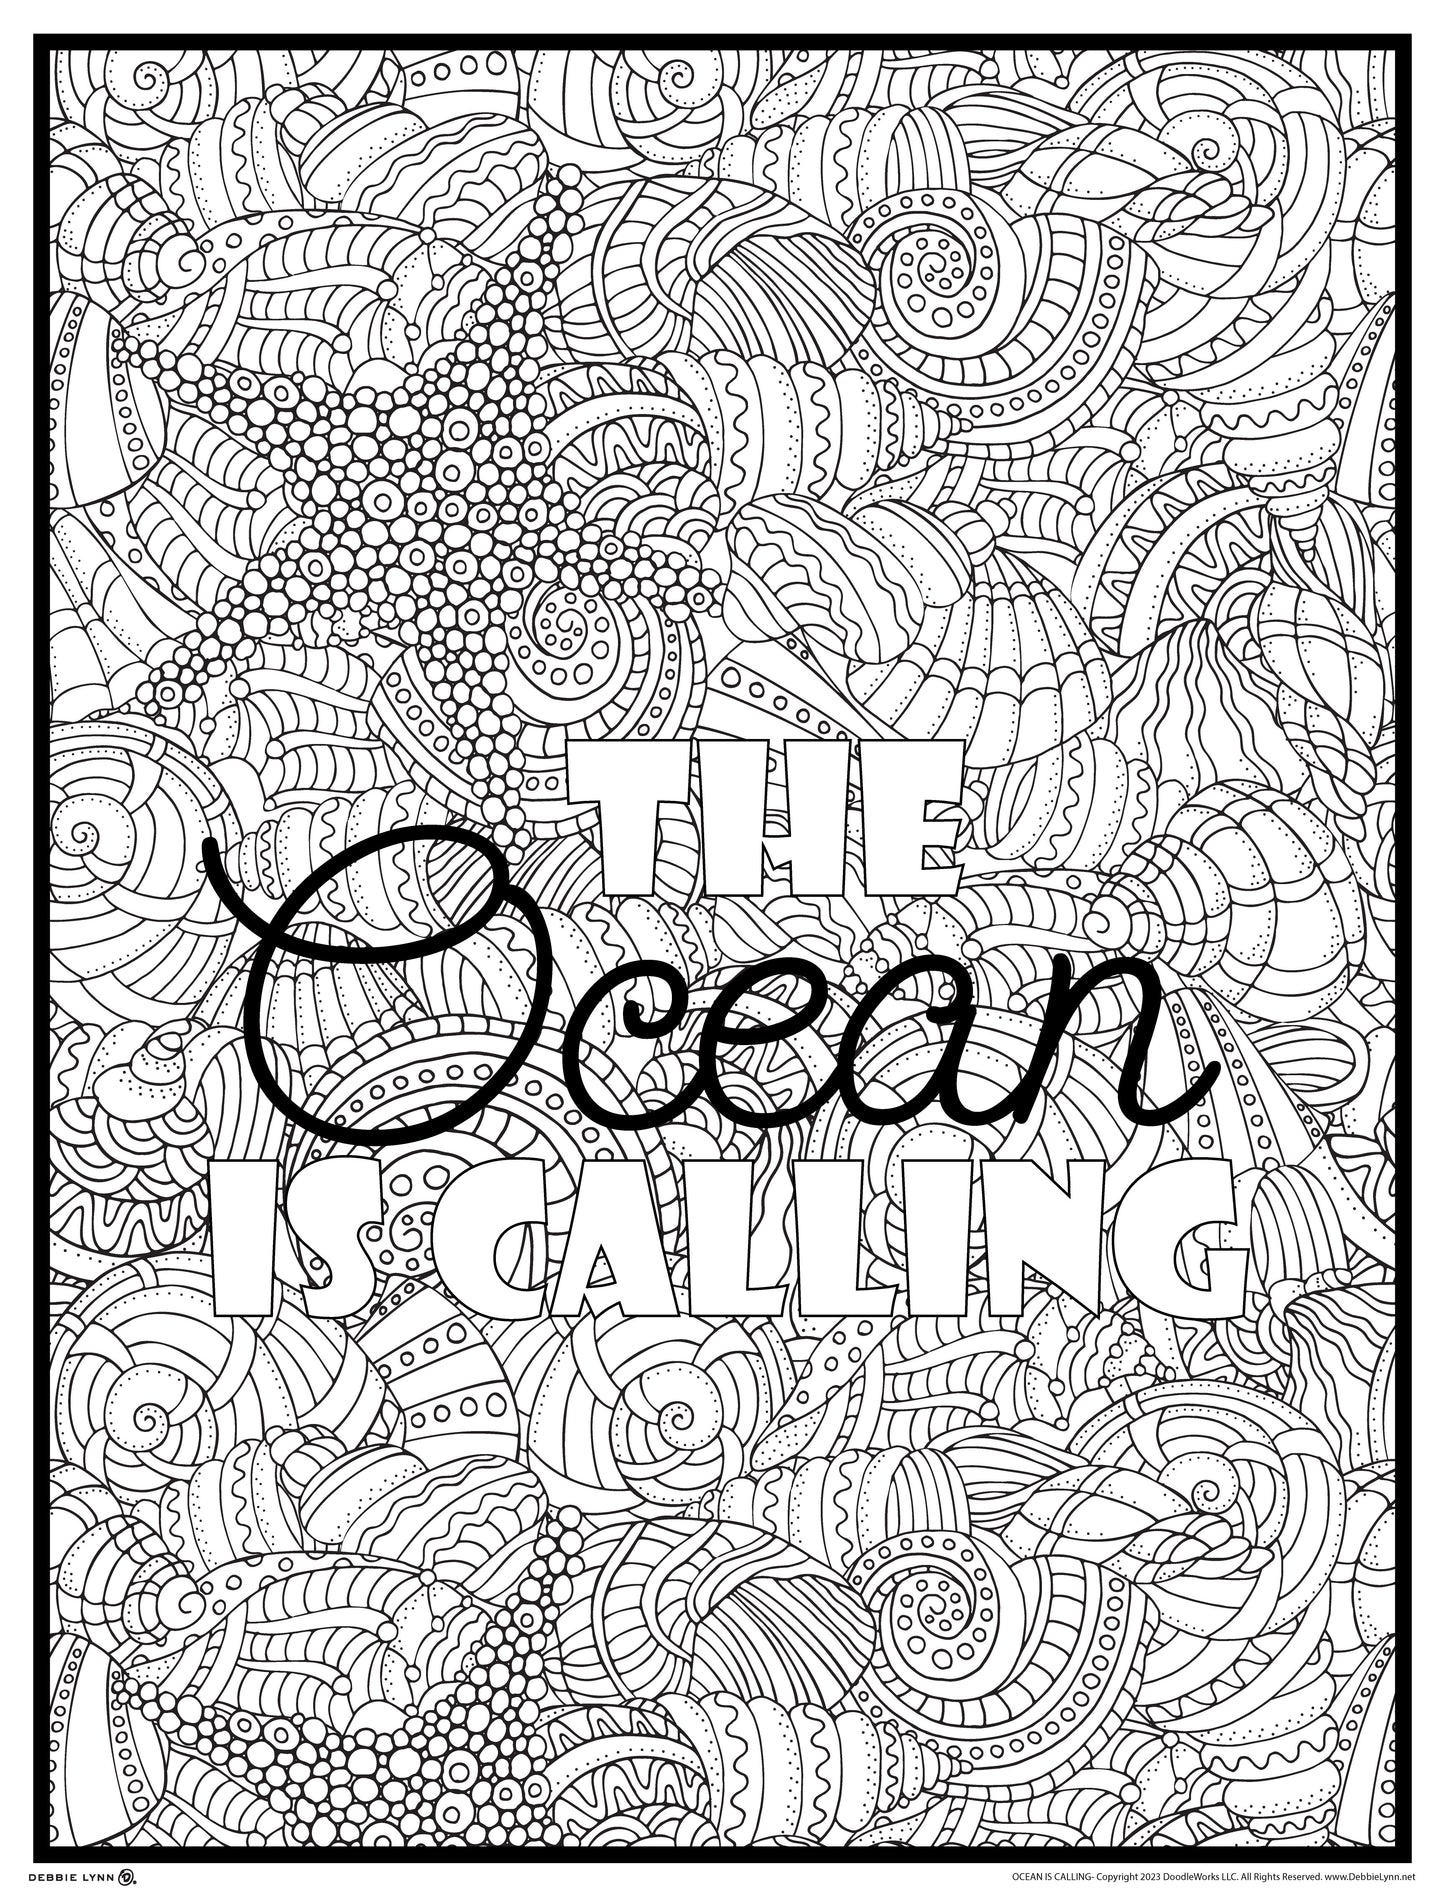 The Ocean is Calling Personalized Giant Coloring Poster 46"x60"